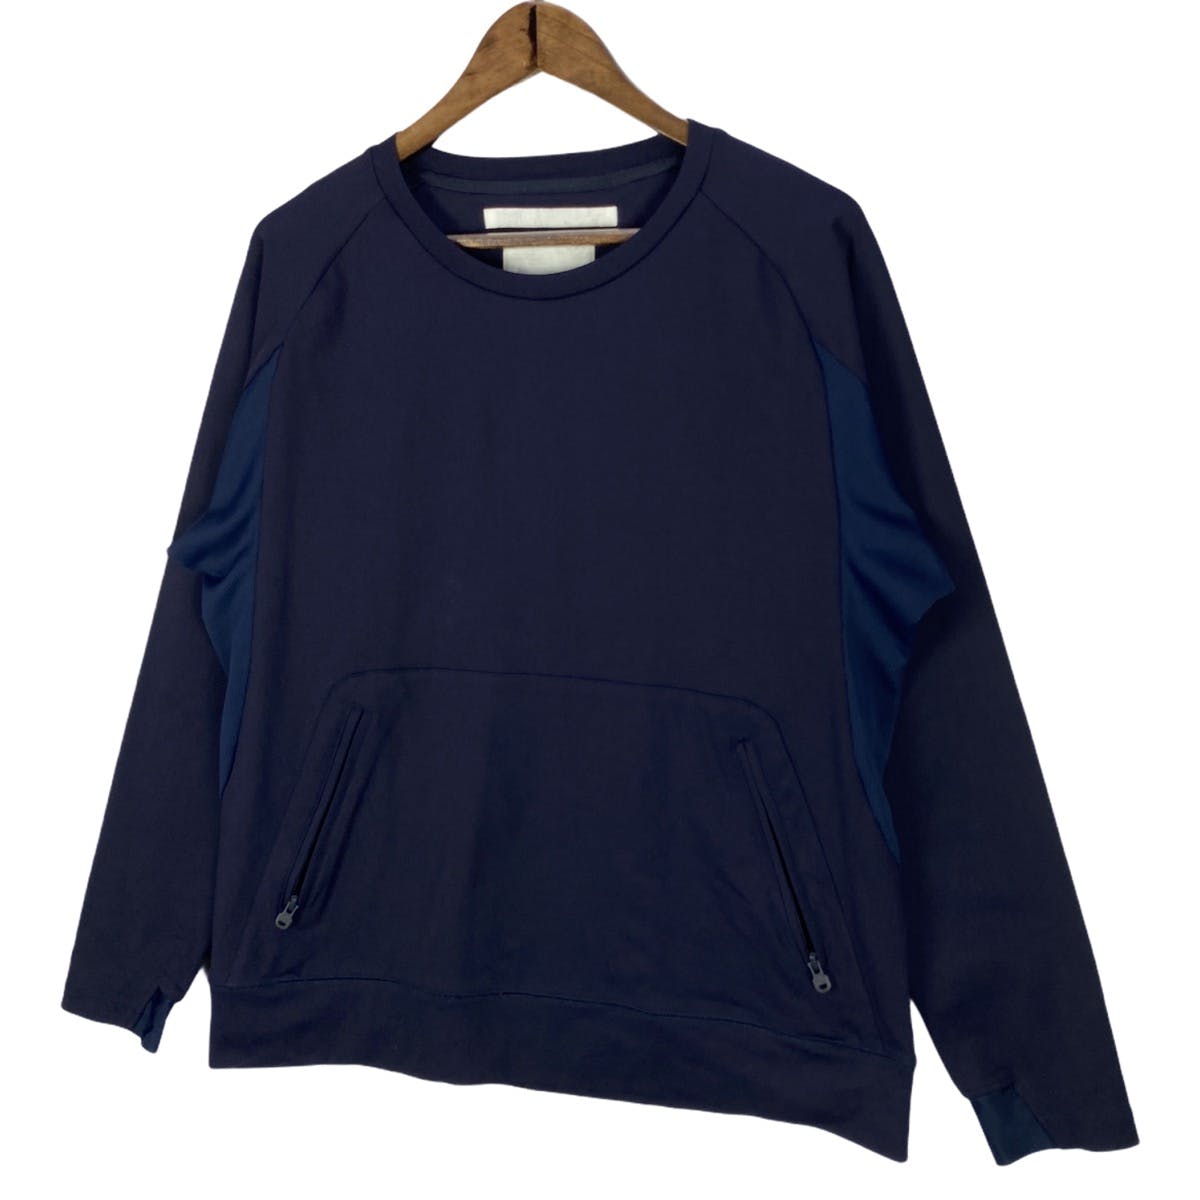 White Mountaineering SS 2016 Collection Sweatshirt - 8